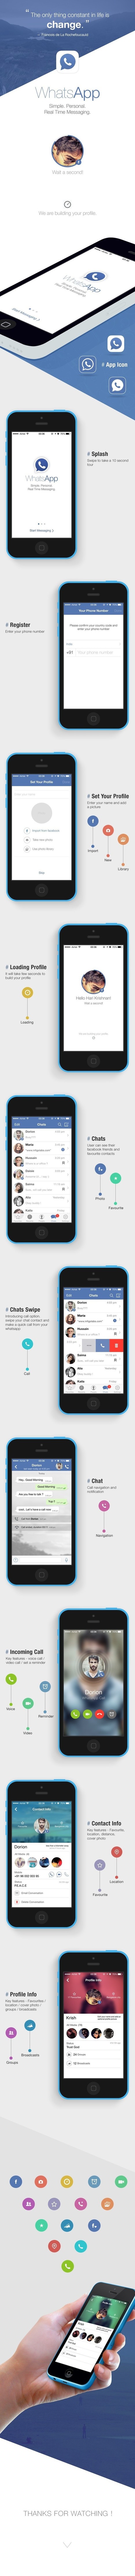 WhatsApp Design integrated Facebook - Tribute to $19 Billion Acquisition | MarketingHits | Scoop.it